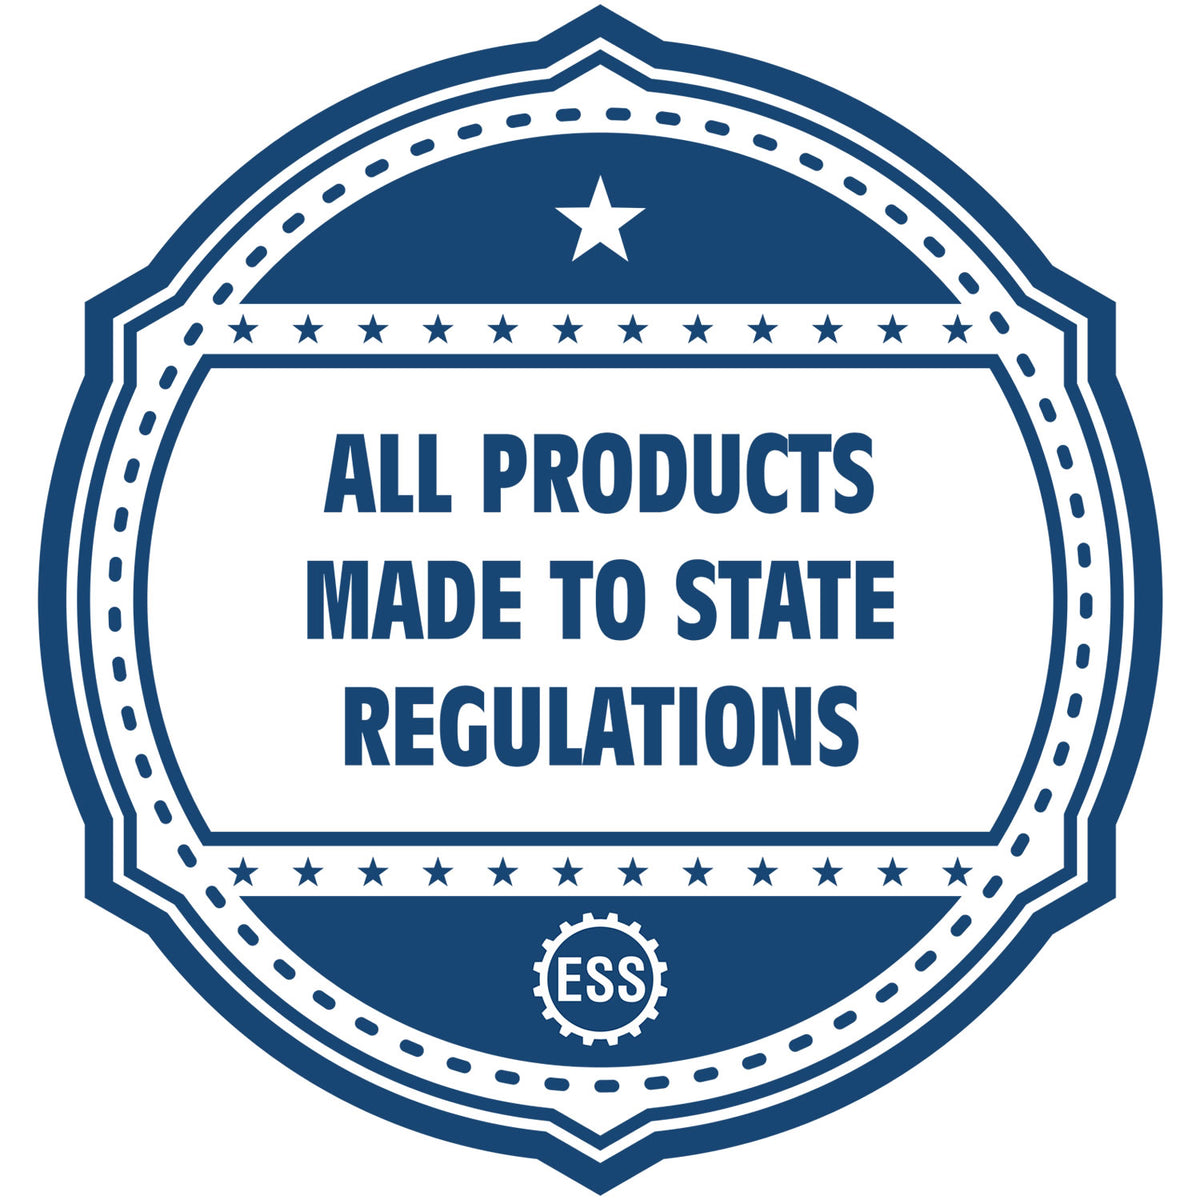 An icon or badge element for the Long Reach New Jersey PE Seal showing that this product is made in compliance with state regulations.